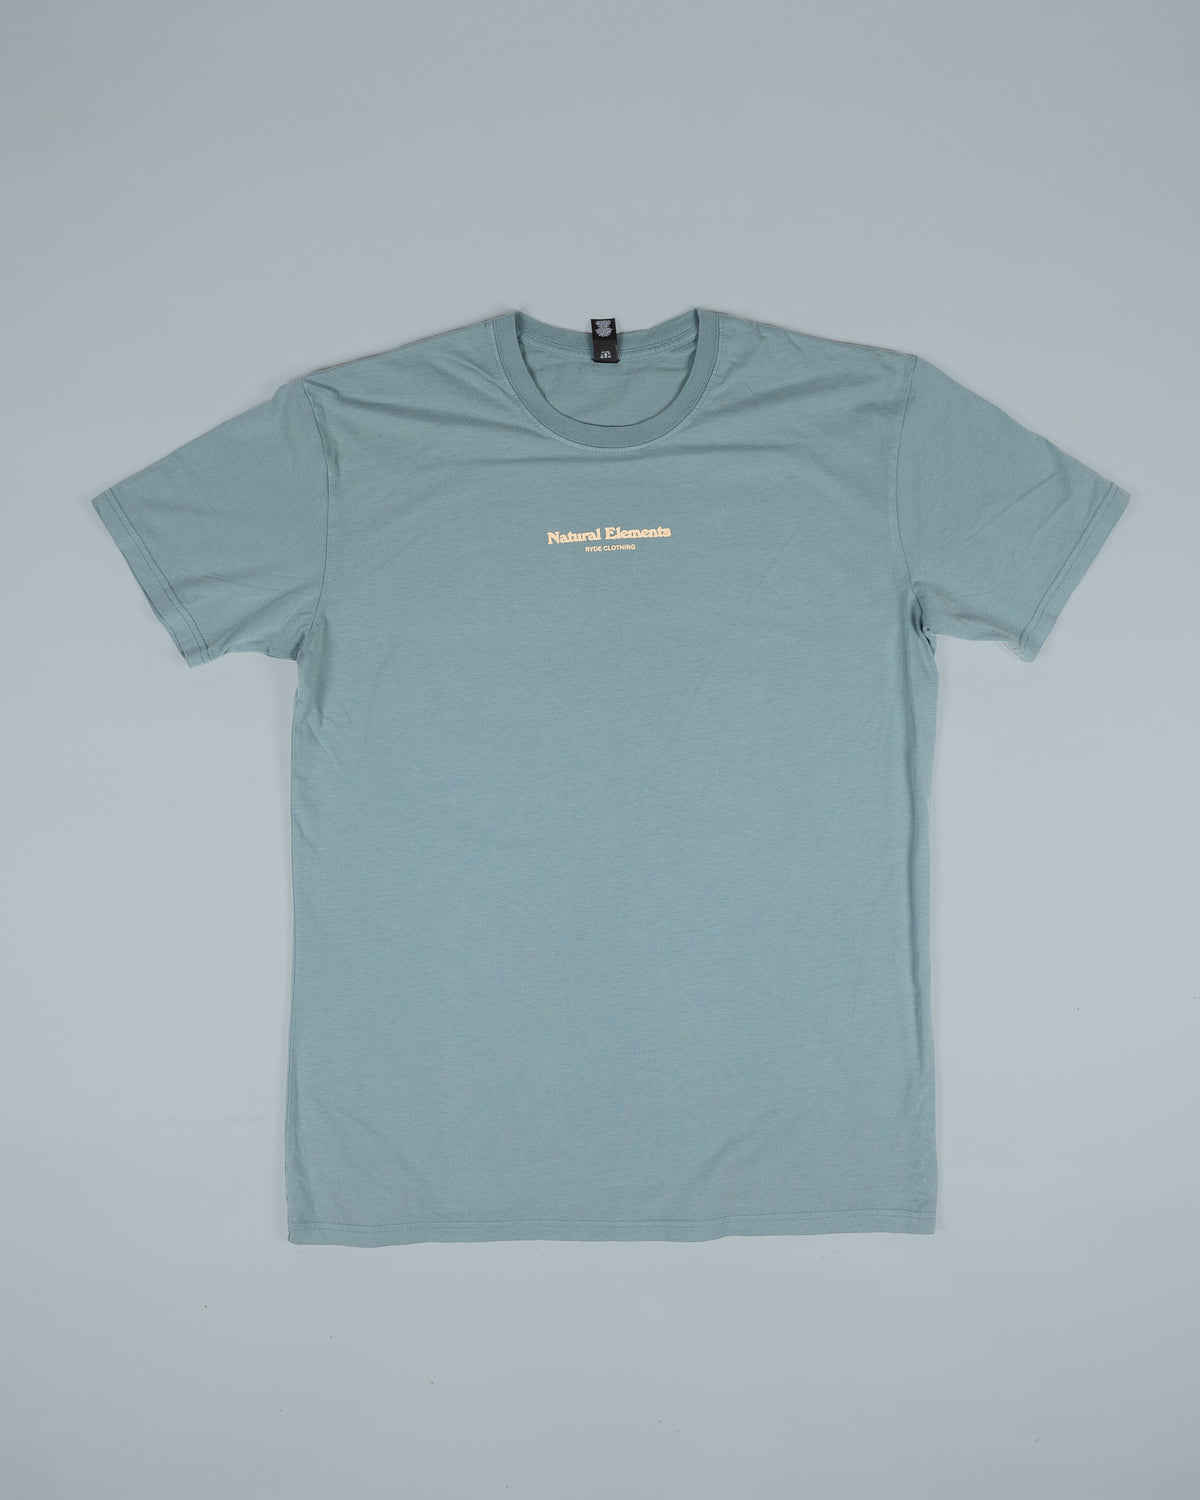 Natural Elements Tee